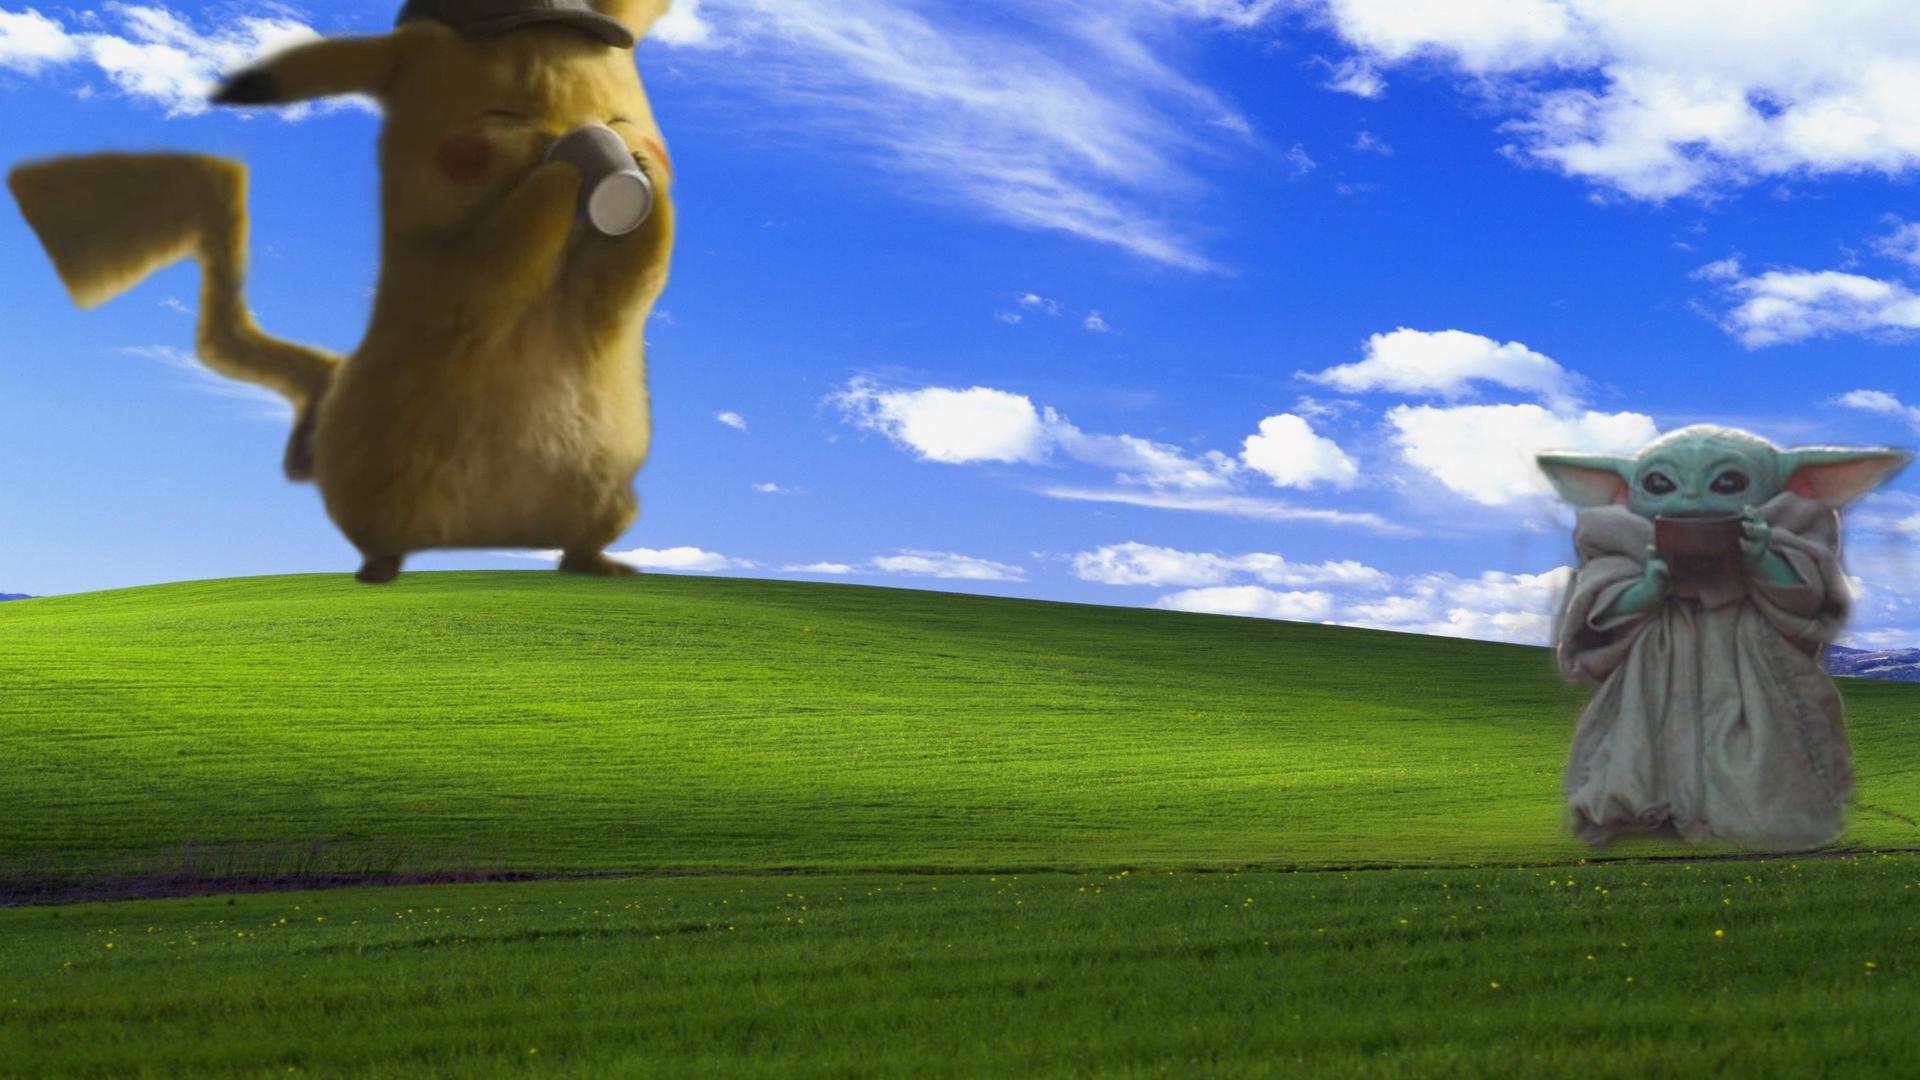 Pikachu and Baby Yoda on a windows XP wallpapers 1920x1080 : wallpapers 